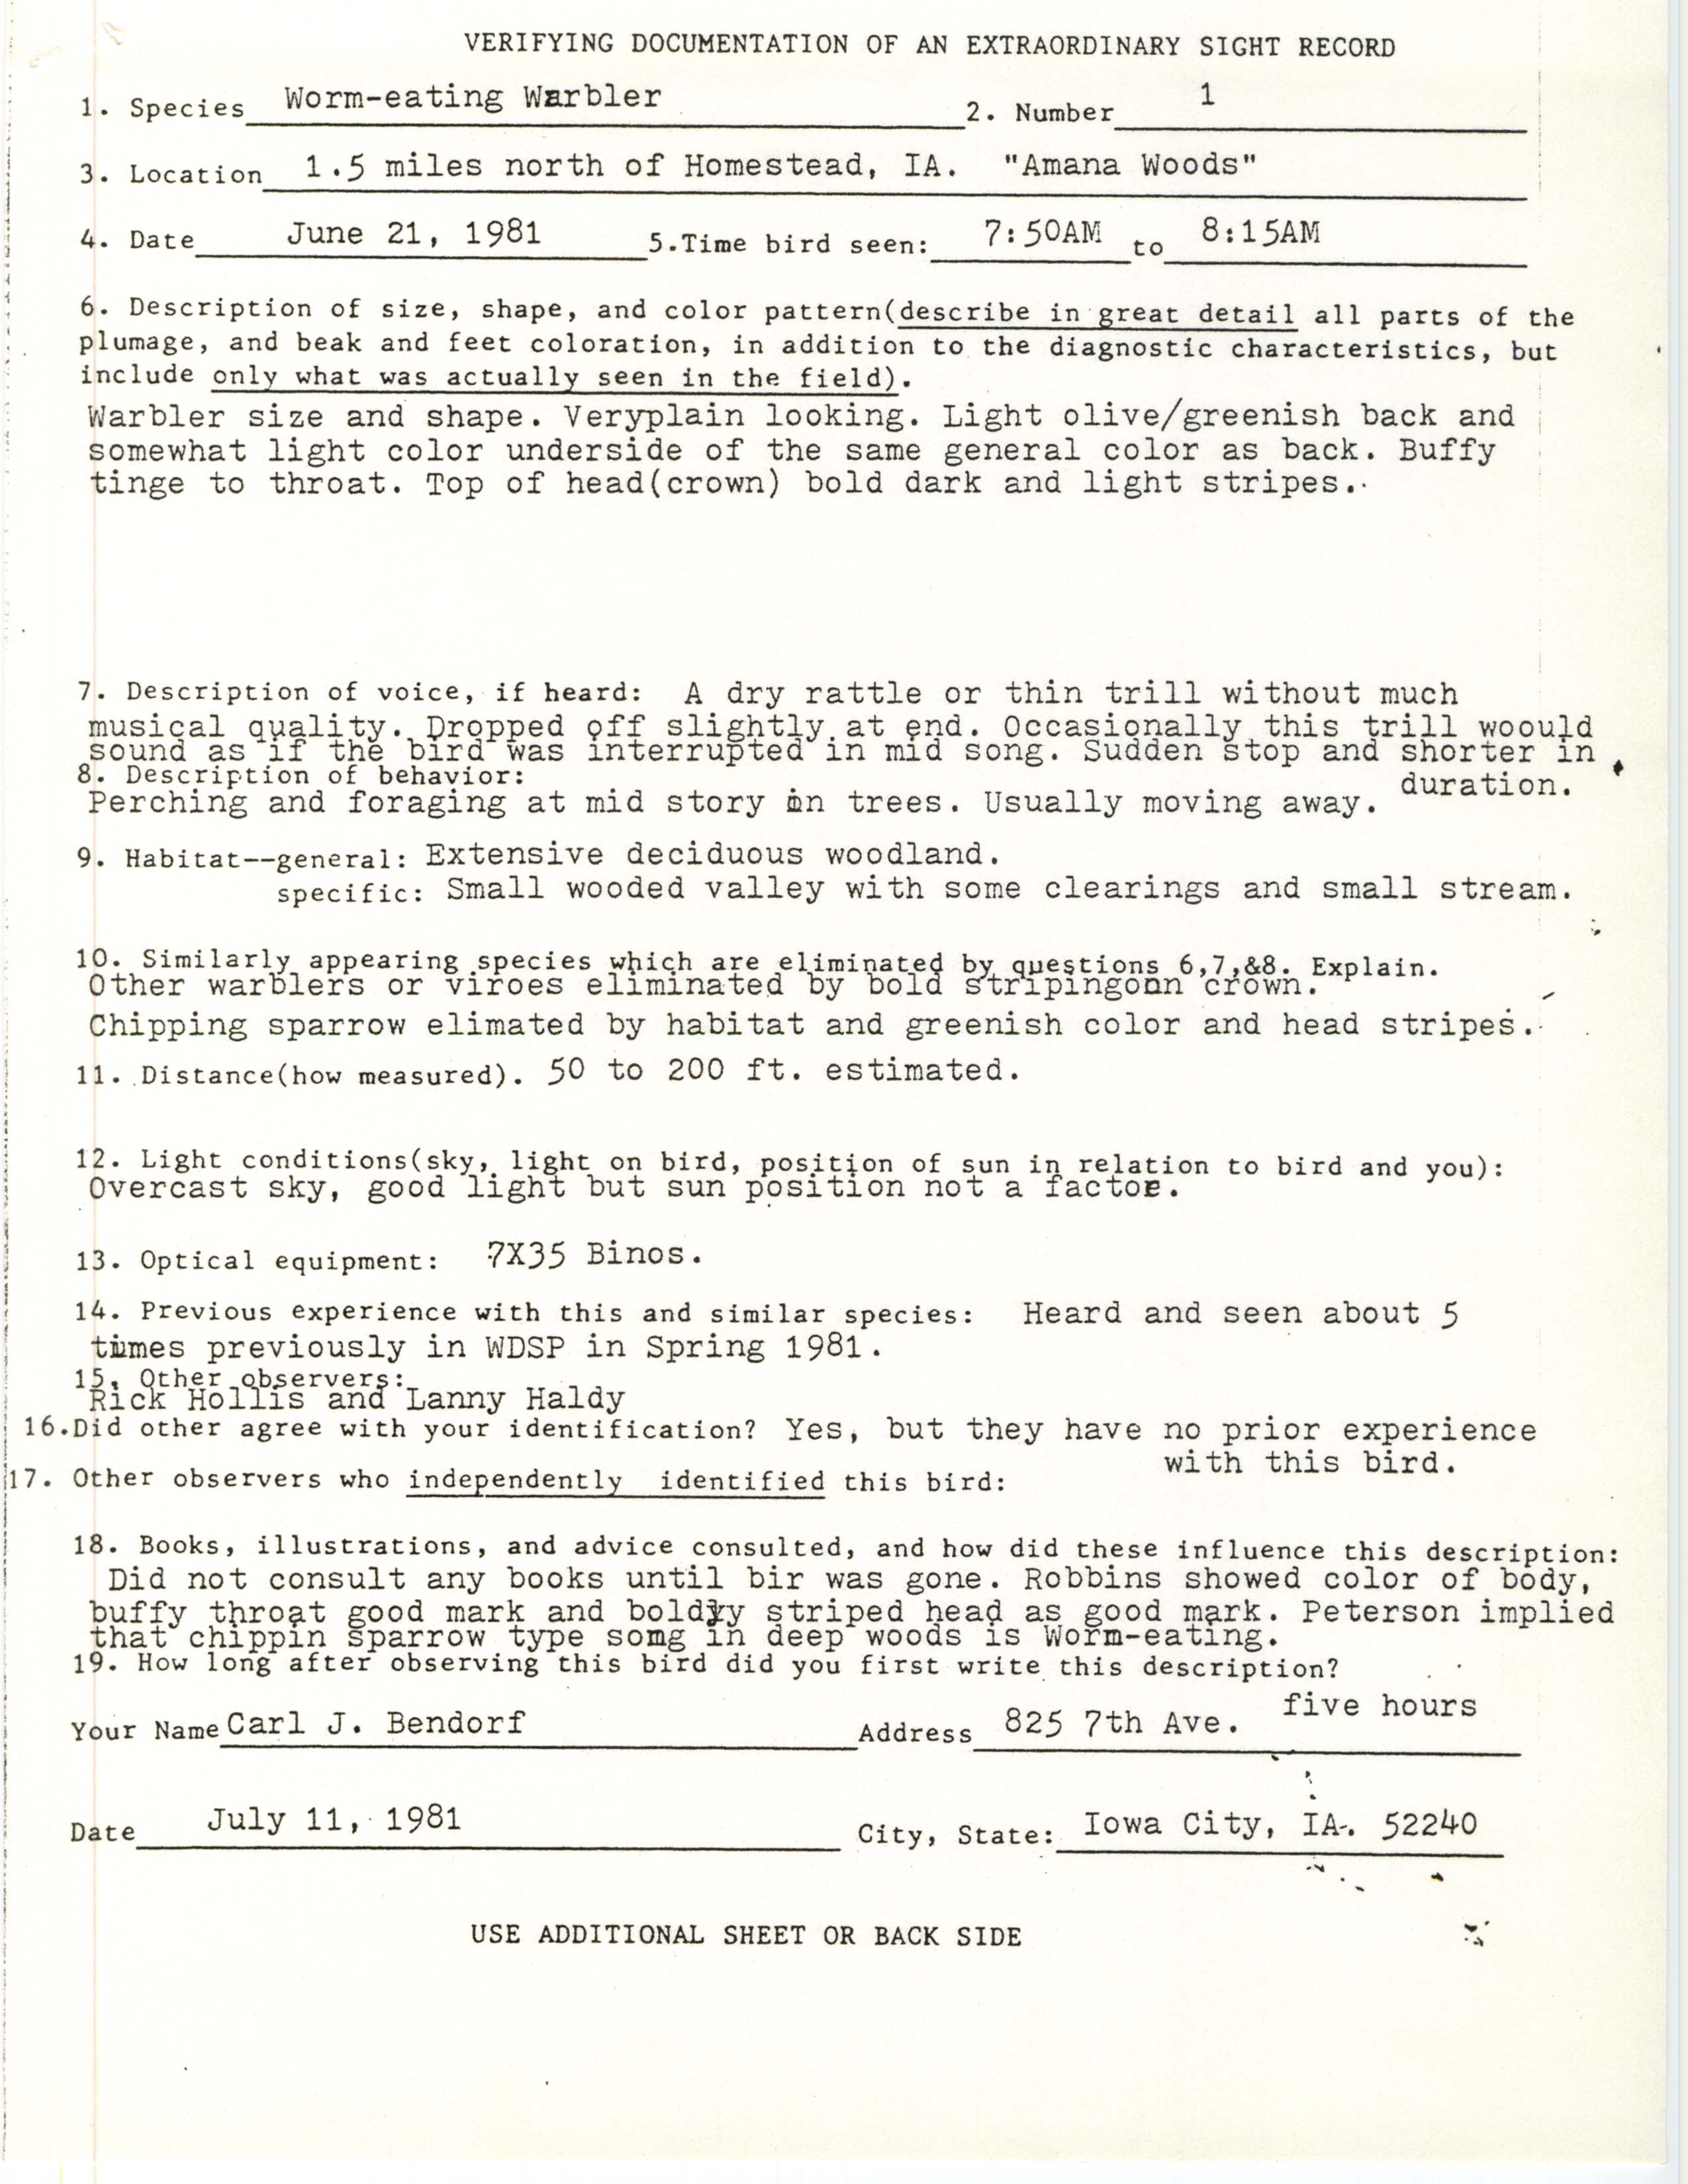 Rare bird documentation form for Worm-eating Warbler at Amana Woods, 1981